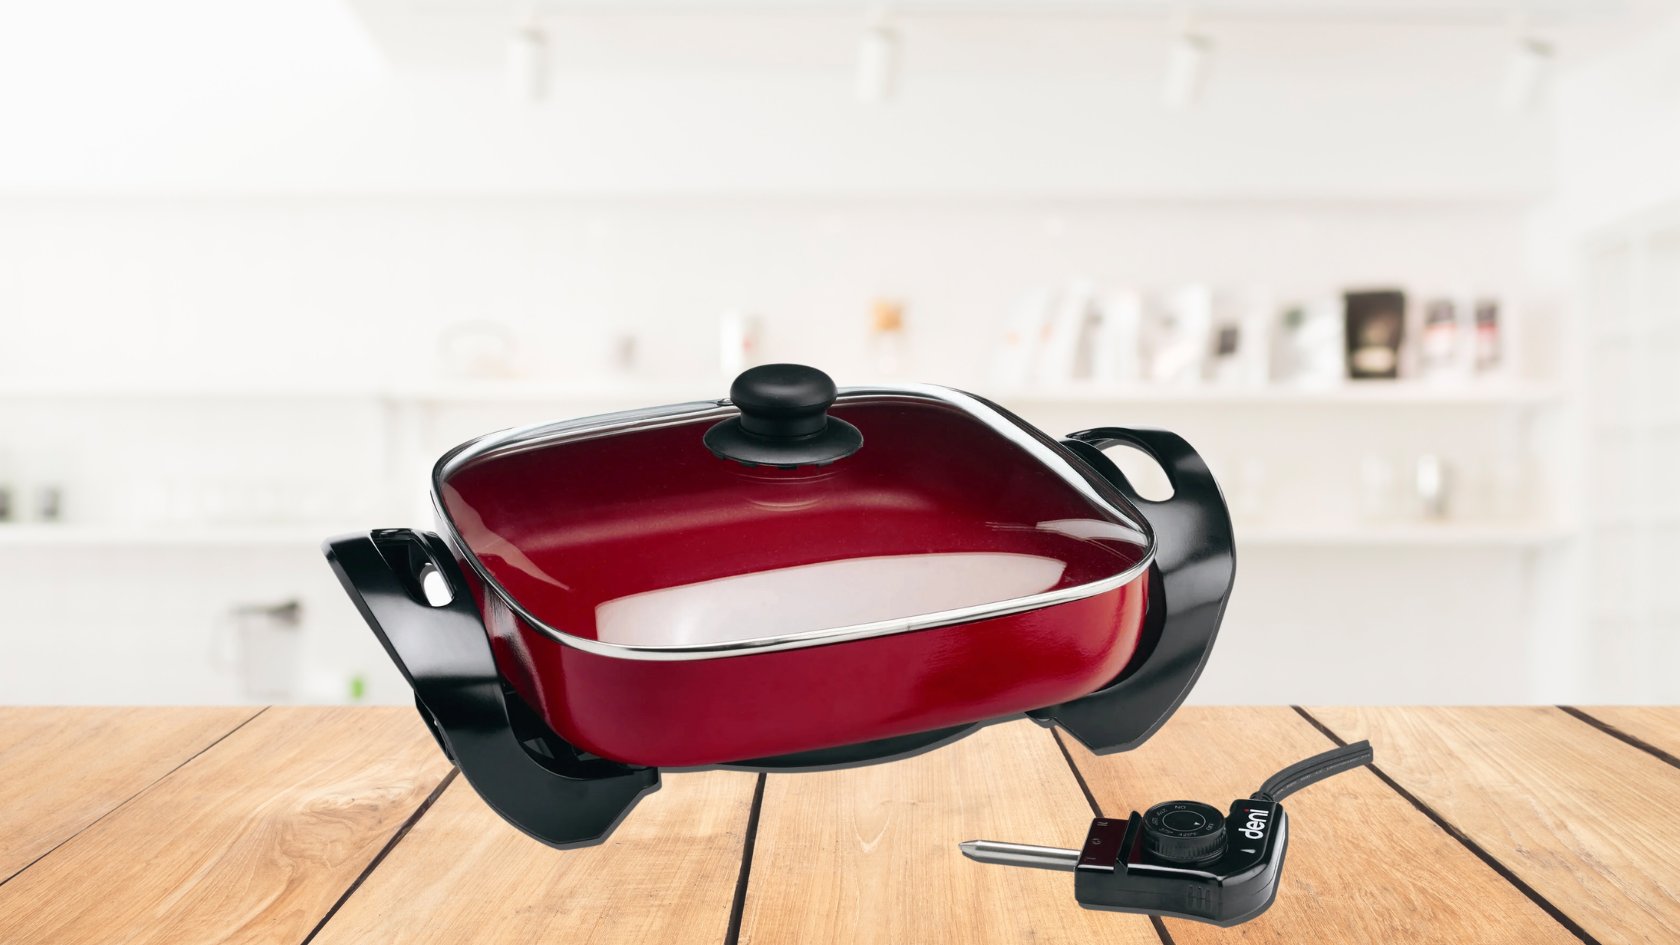 https://storables.com/wp-content/uploads/2023/07/where-can-i-buy-red-electric-skillet-13x16-1690206085.jpg